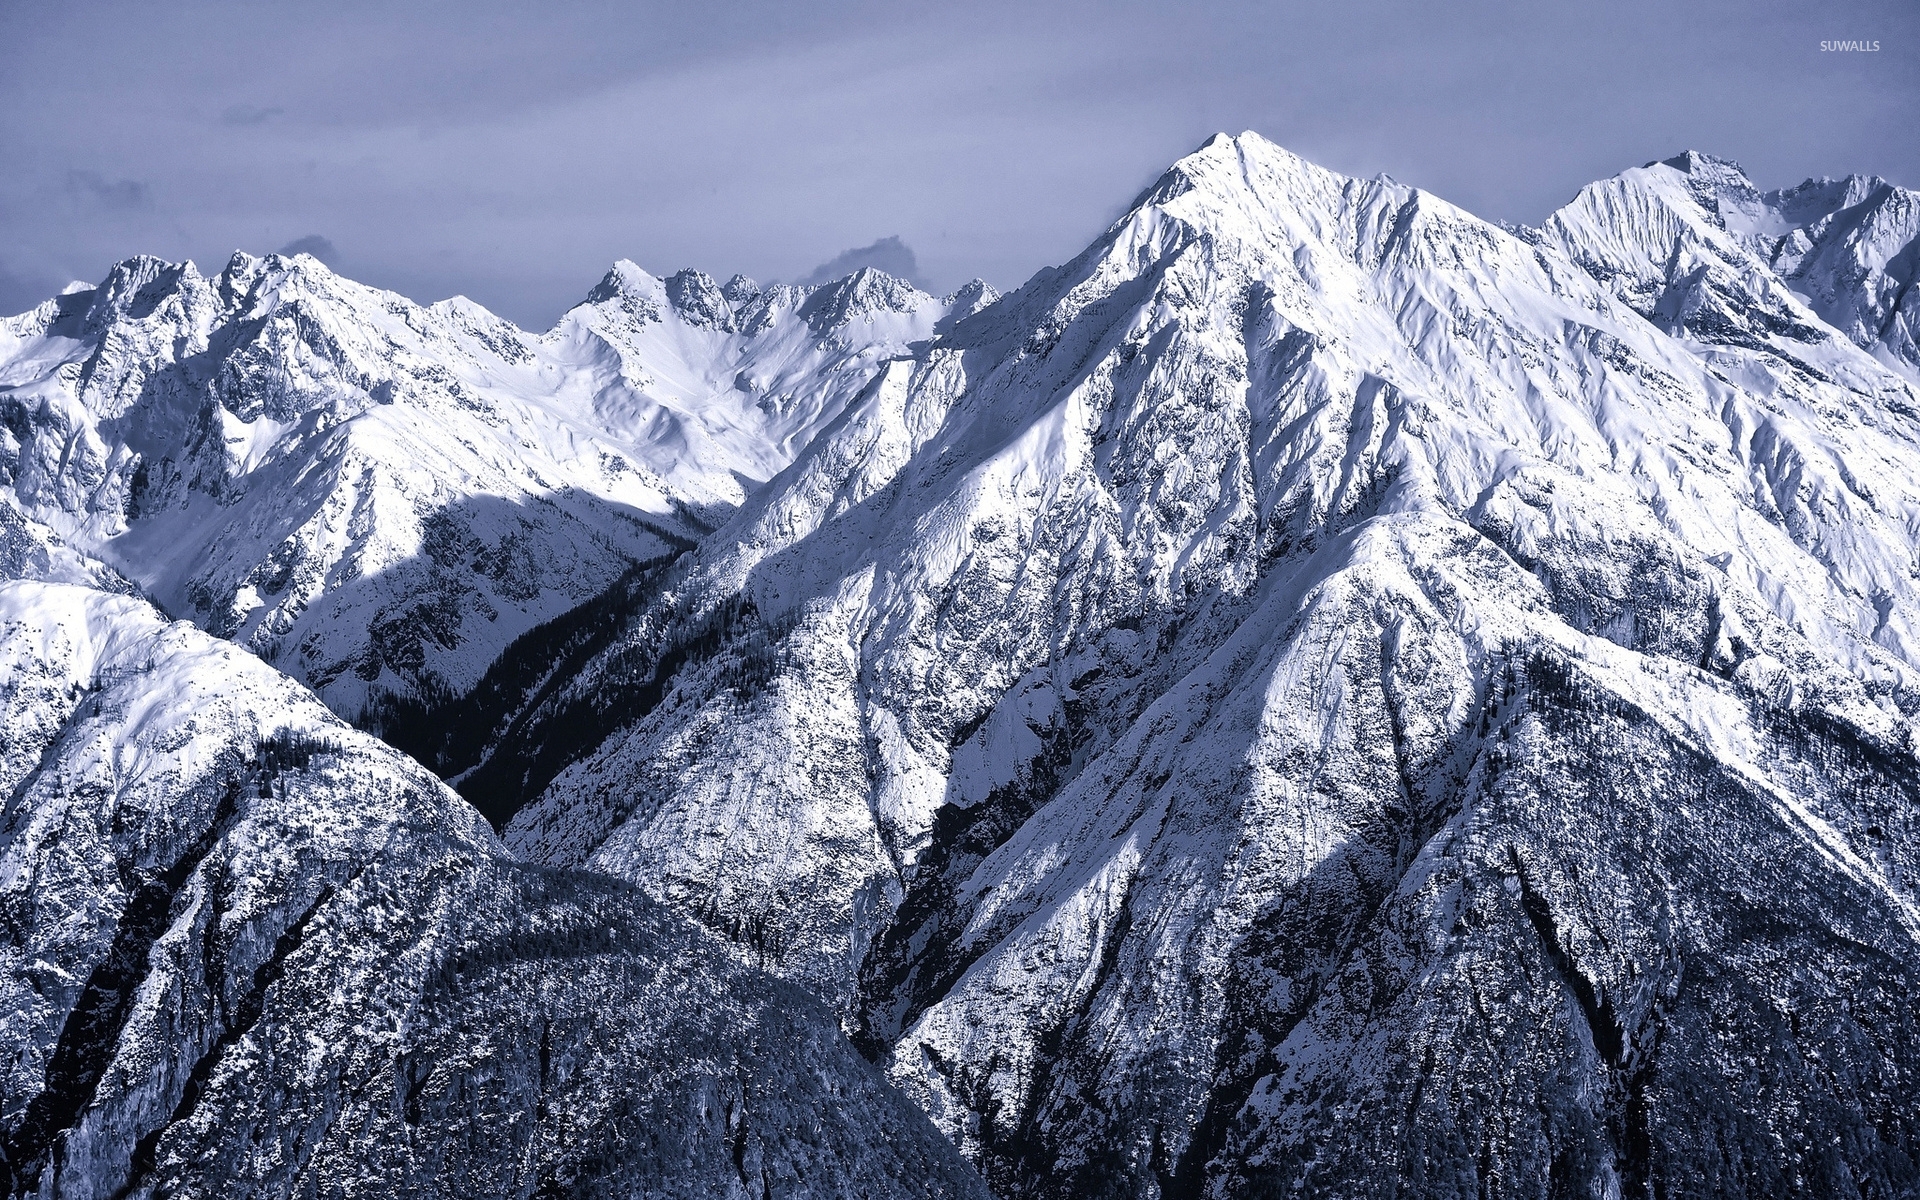 Snowy rocky mountains wallpaper - Nature wallpapers - #36084